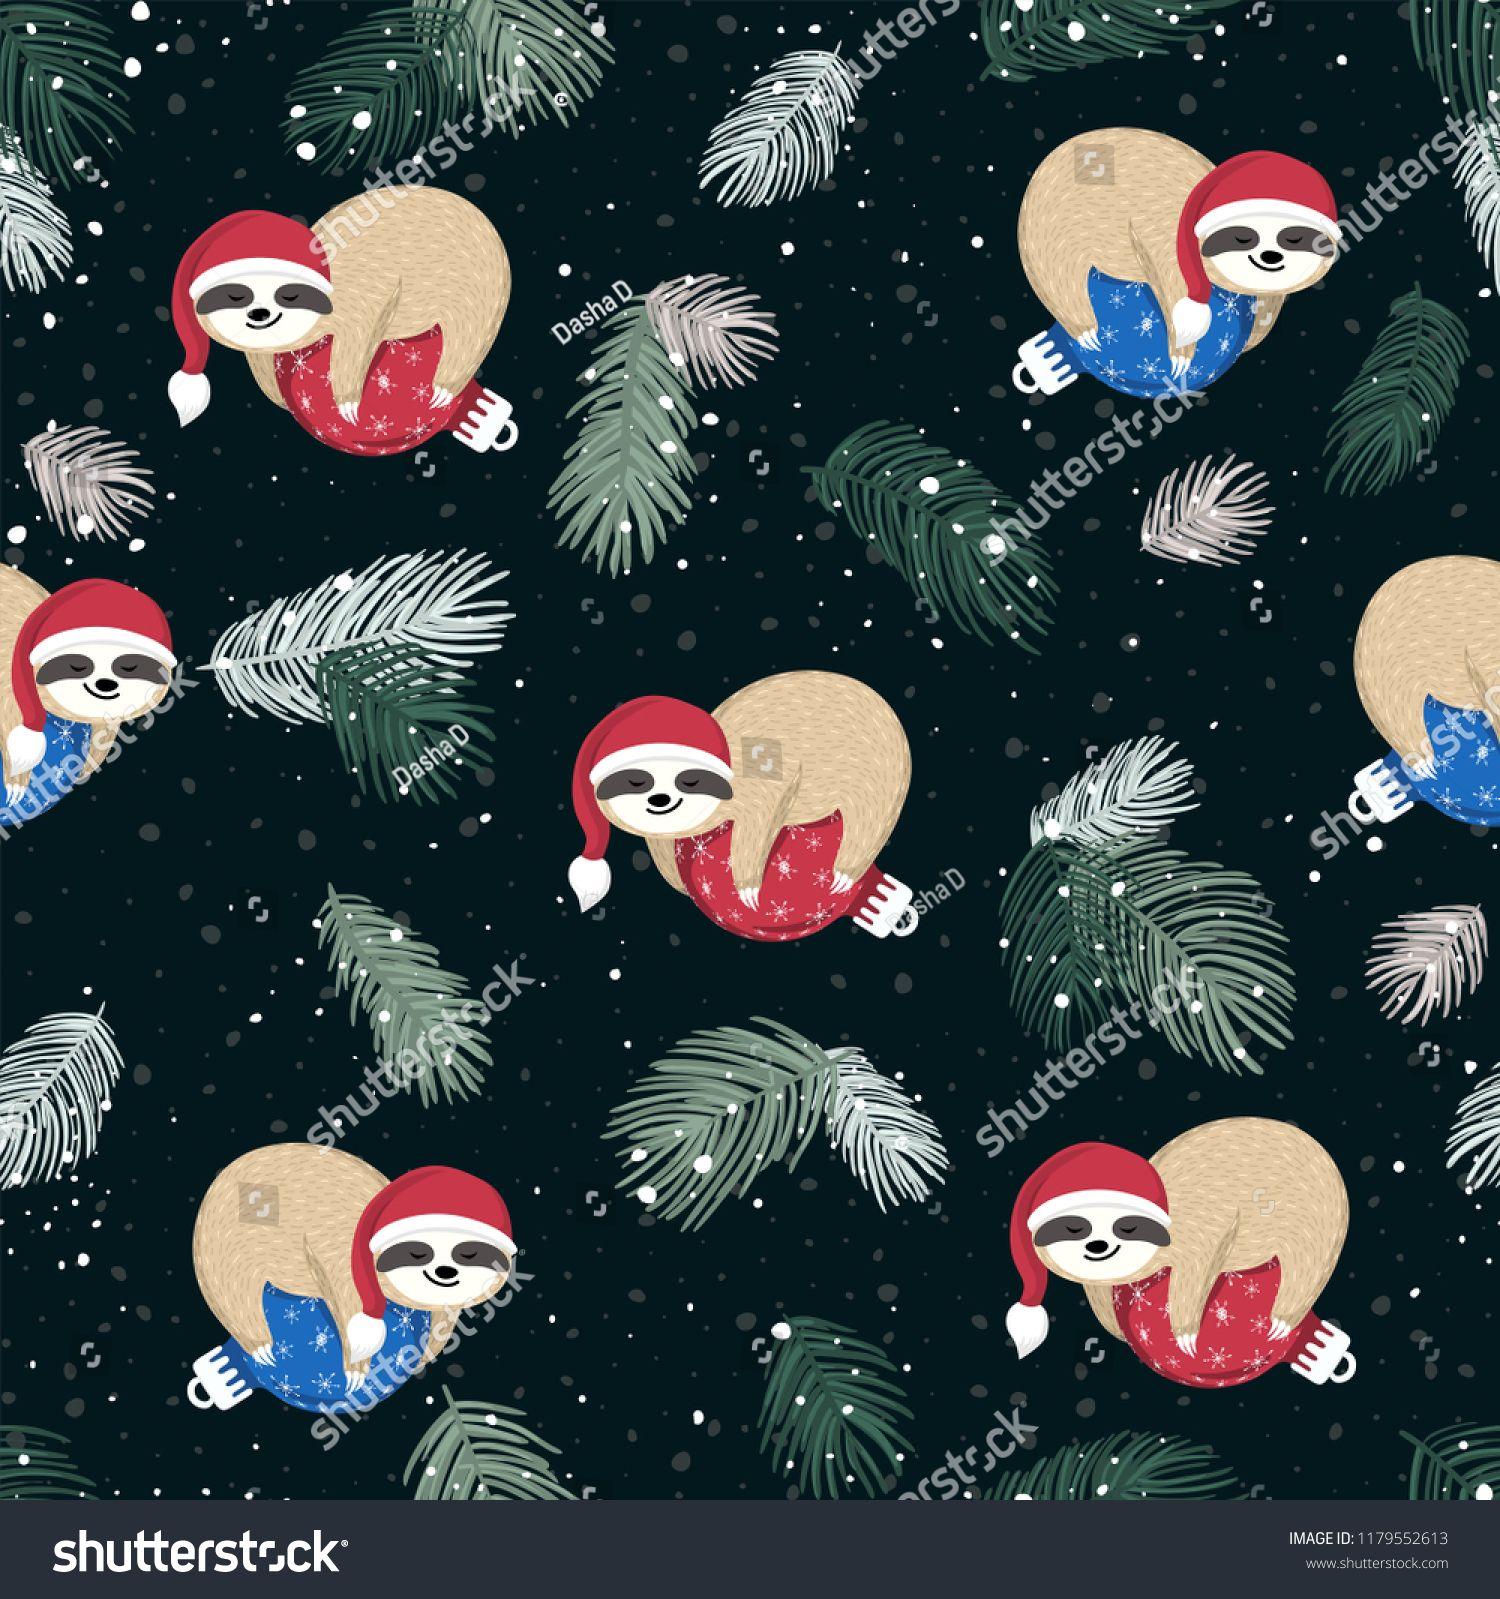 Seamless Pattern With Cute Baby Sloths Sleeping On The Blue And